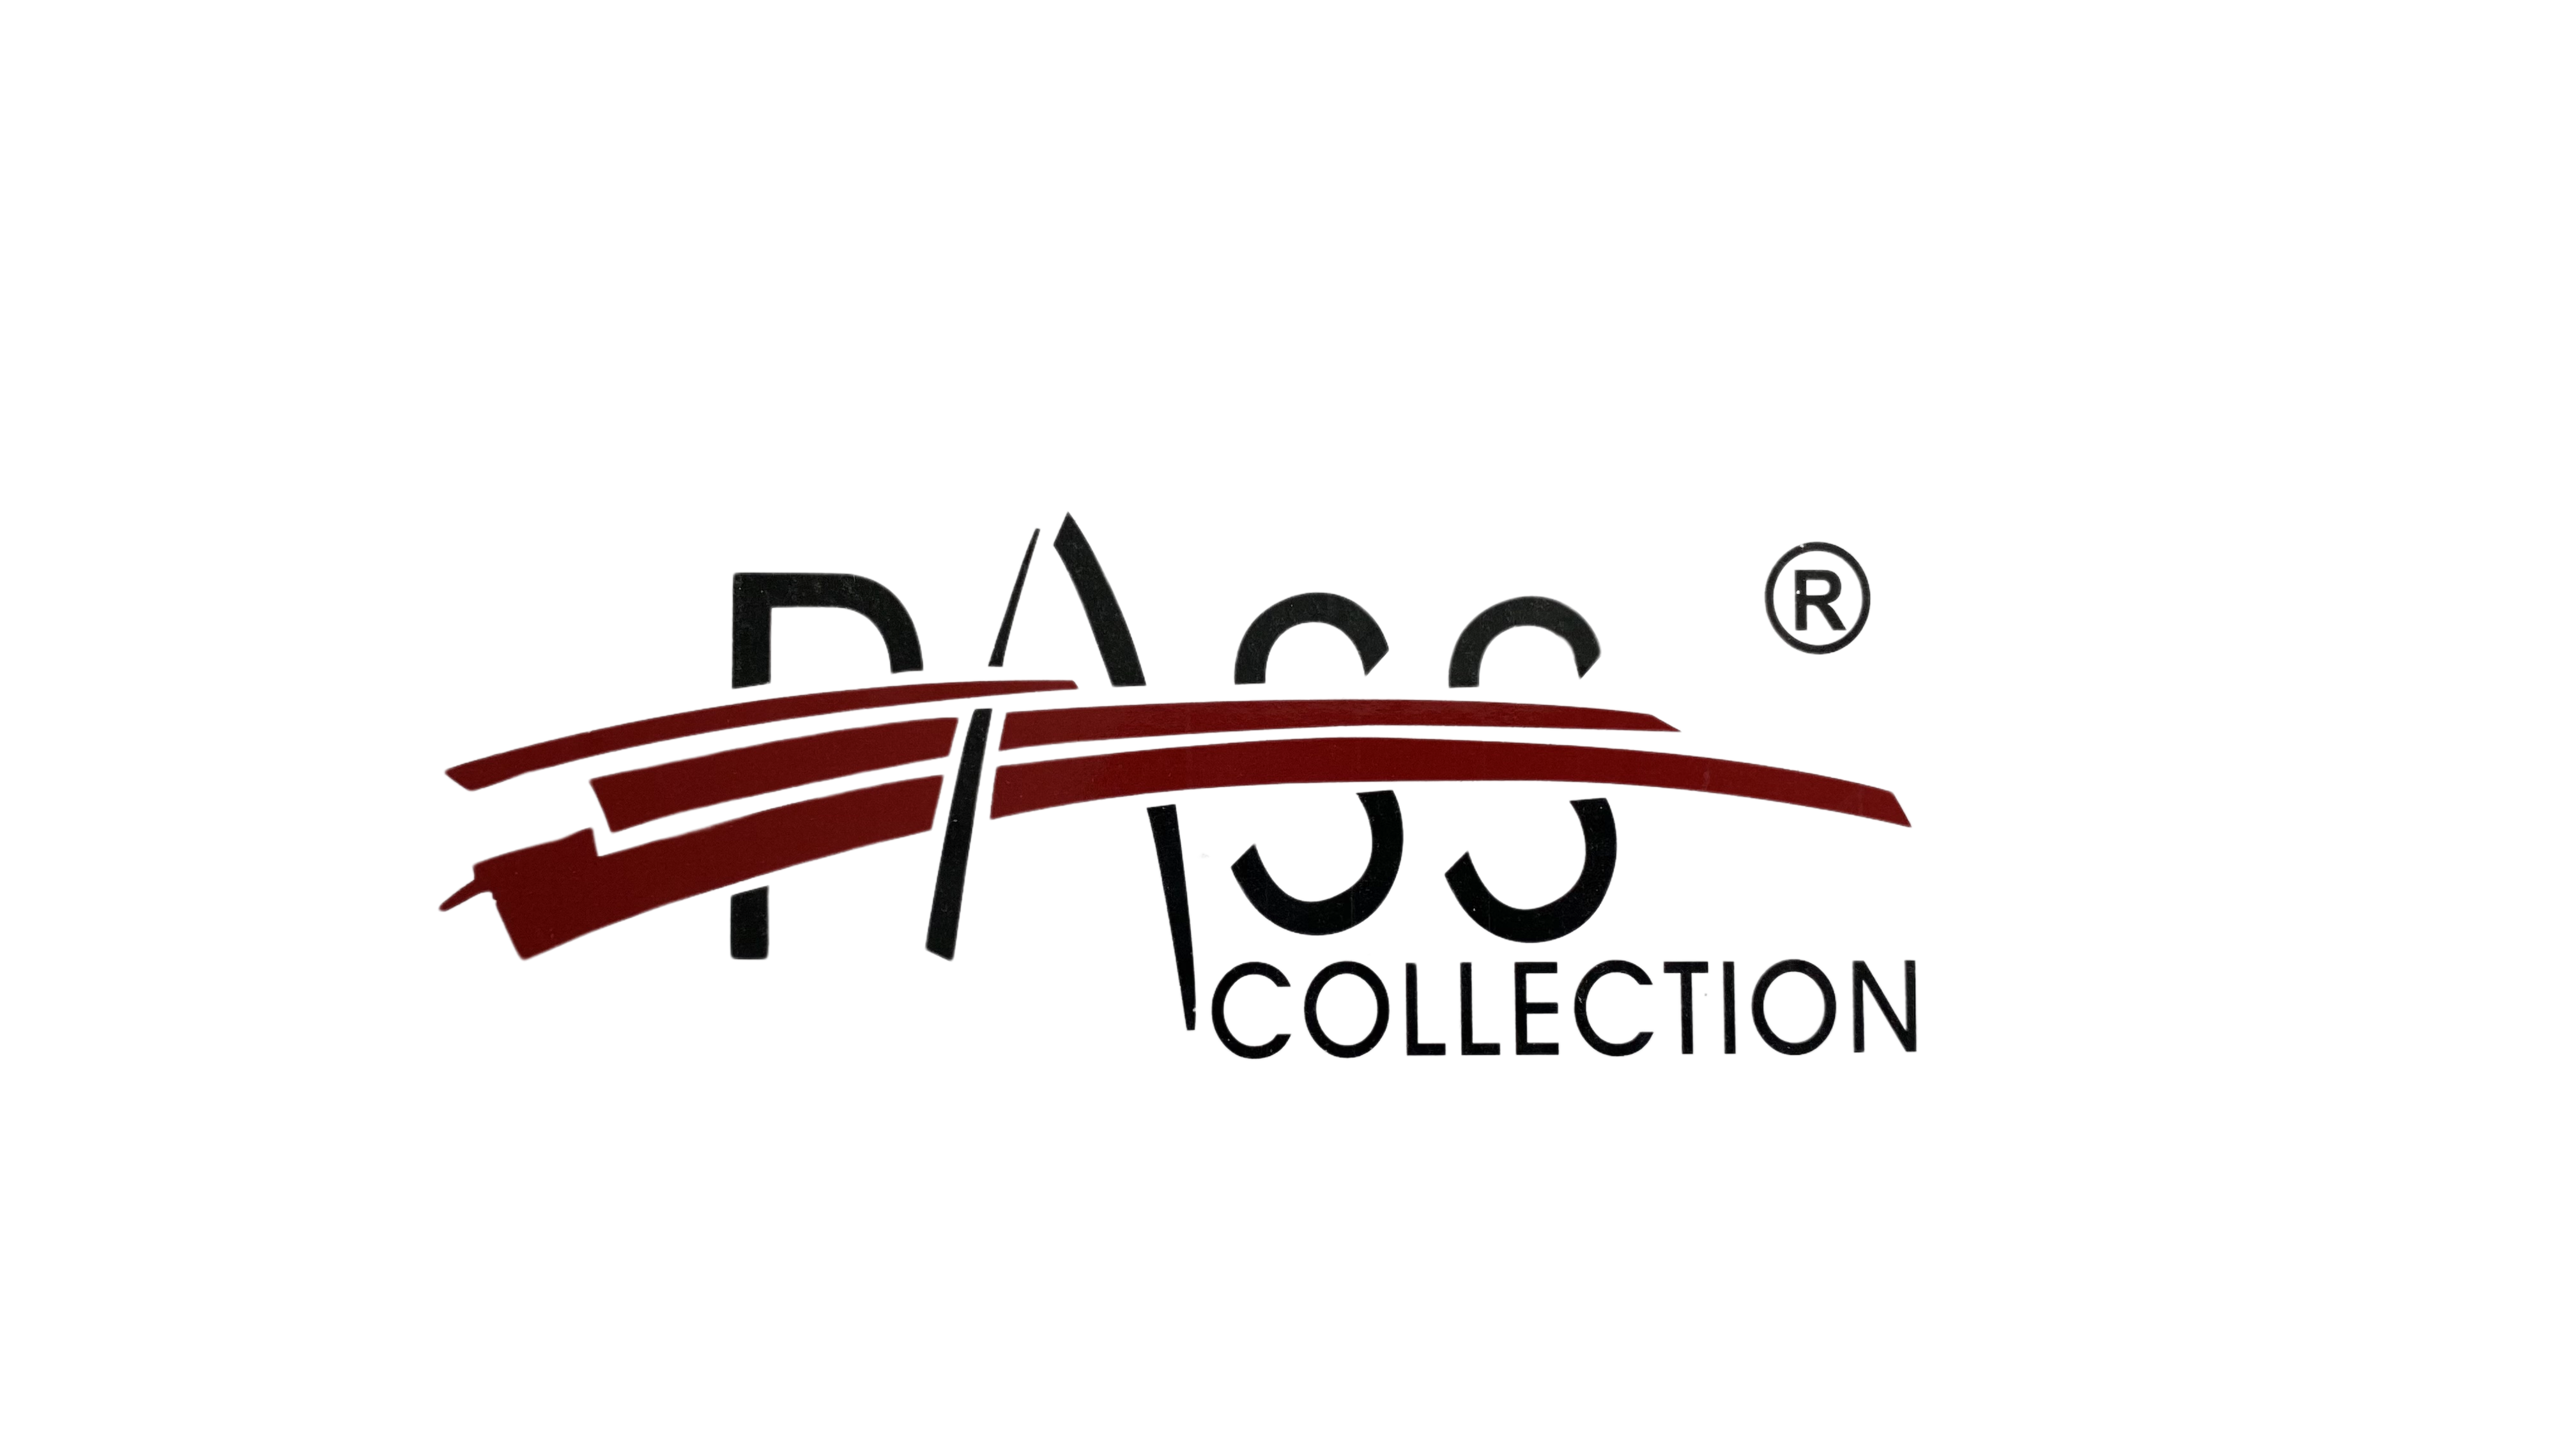 Pass collection